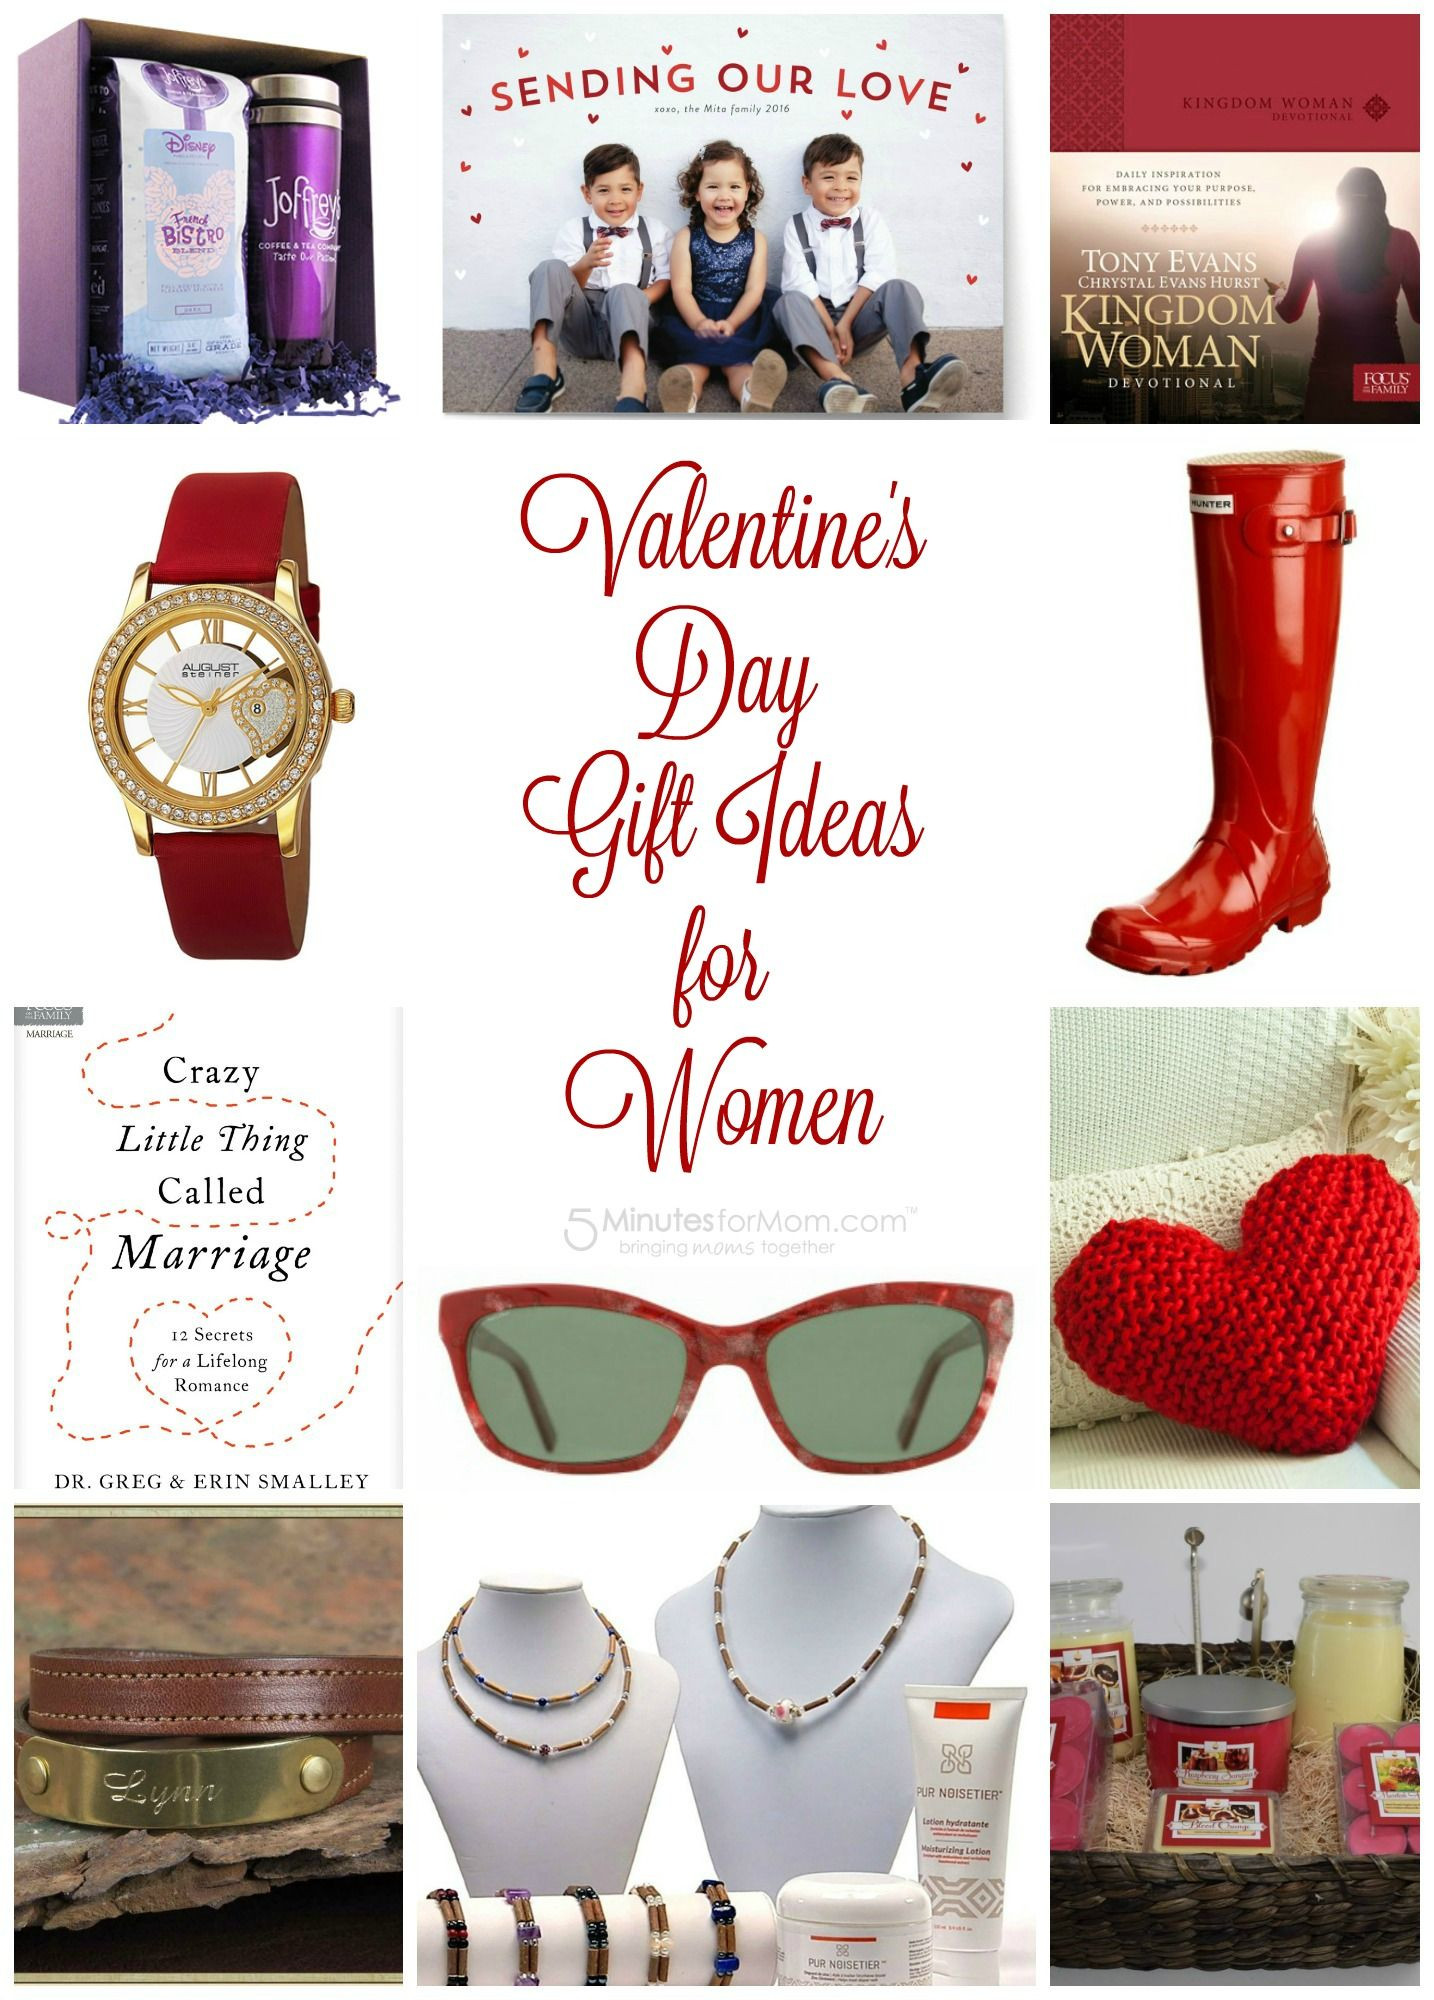 Amazon Gift Ideas For Girlfriend
 Valentine s Day Gift Guide for Women Plus $100 Amazon